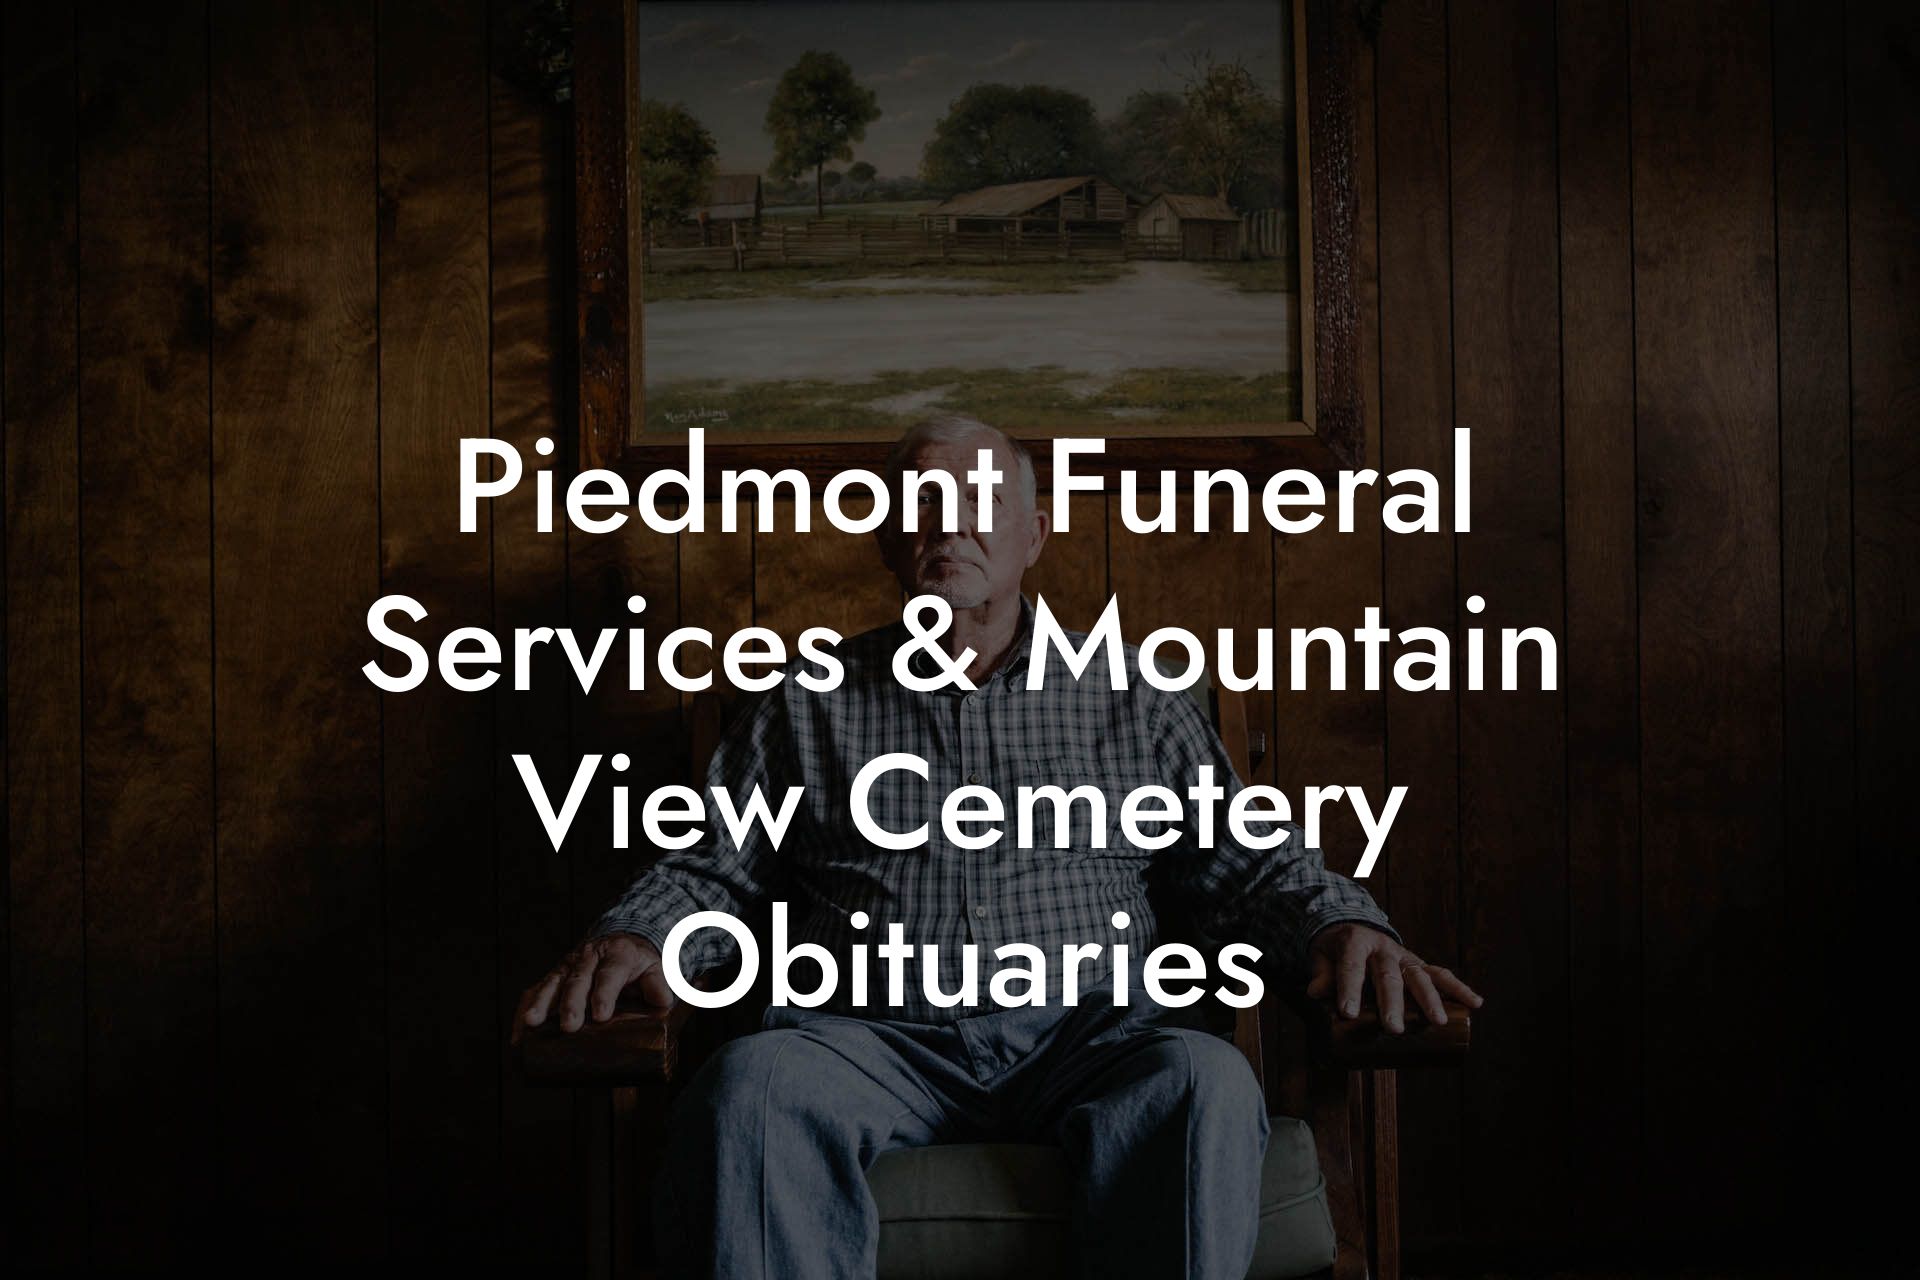 Piedmont Funeral Services & Mountain View Cemetery Obituaries